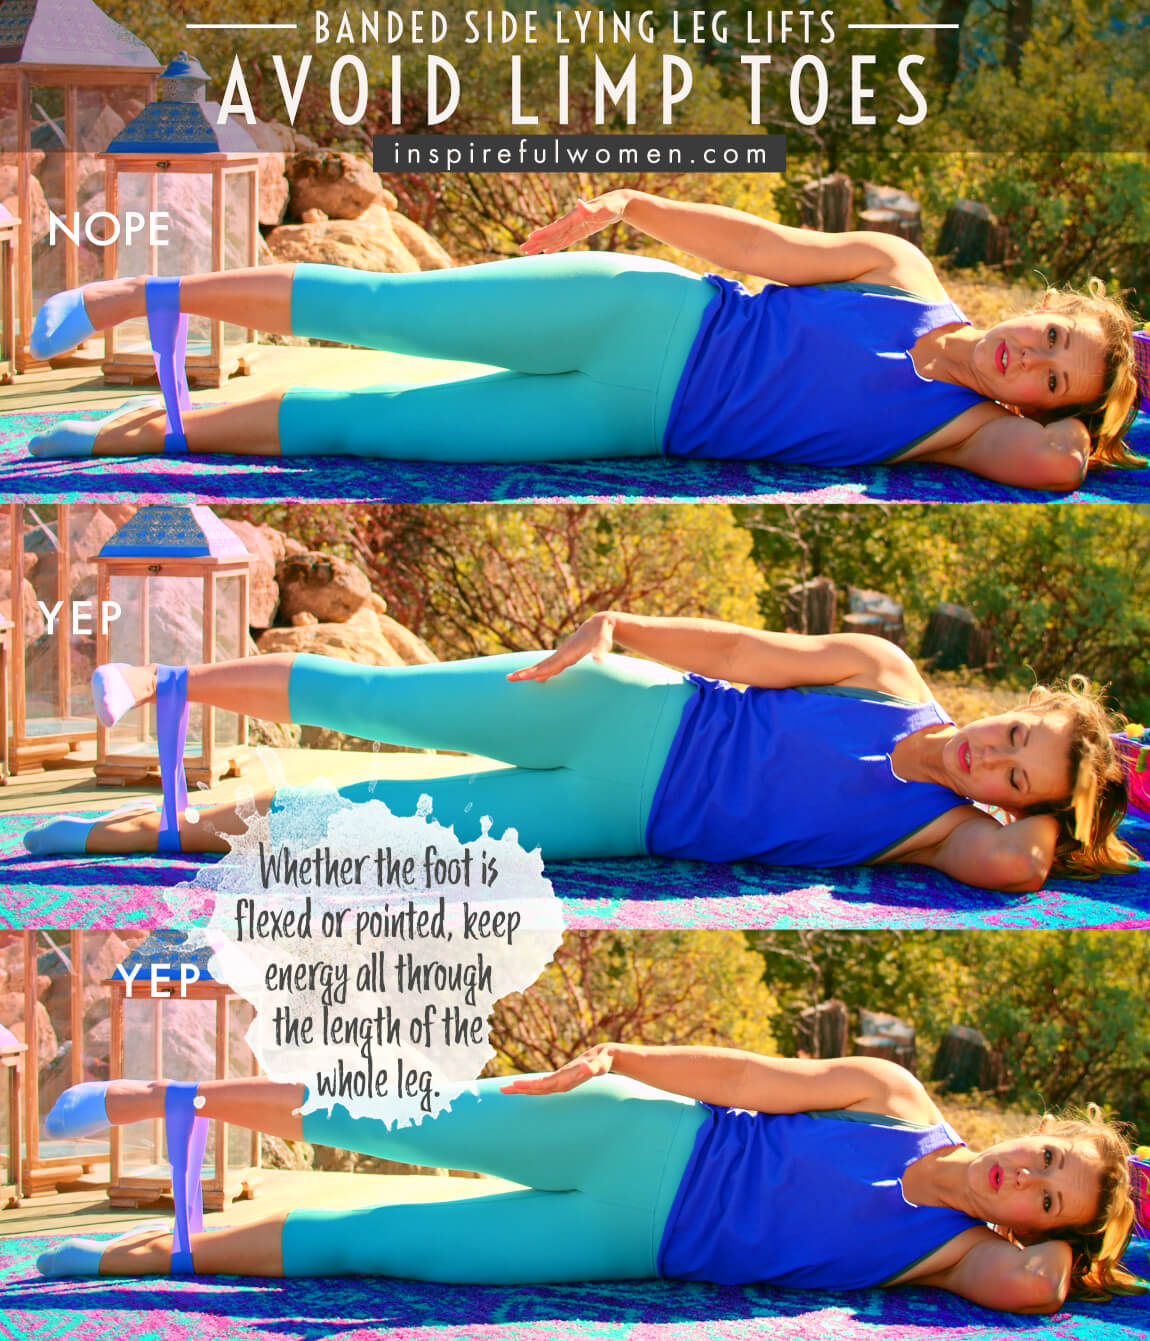 avoid-limp-toes-resistance-band-side-lying-leg-lifts-proper-form